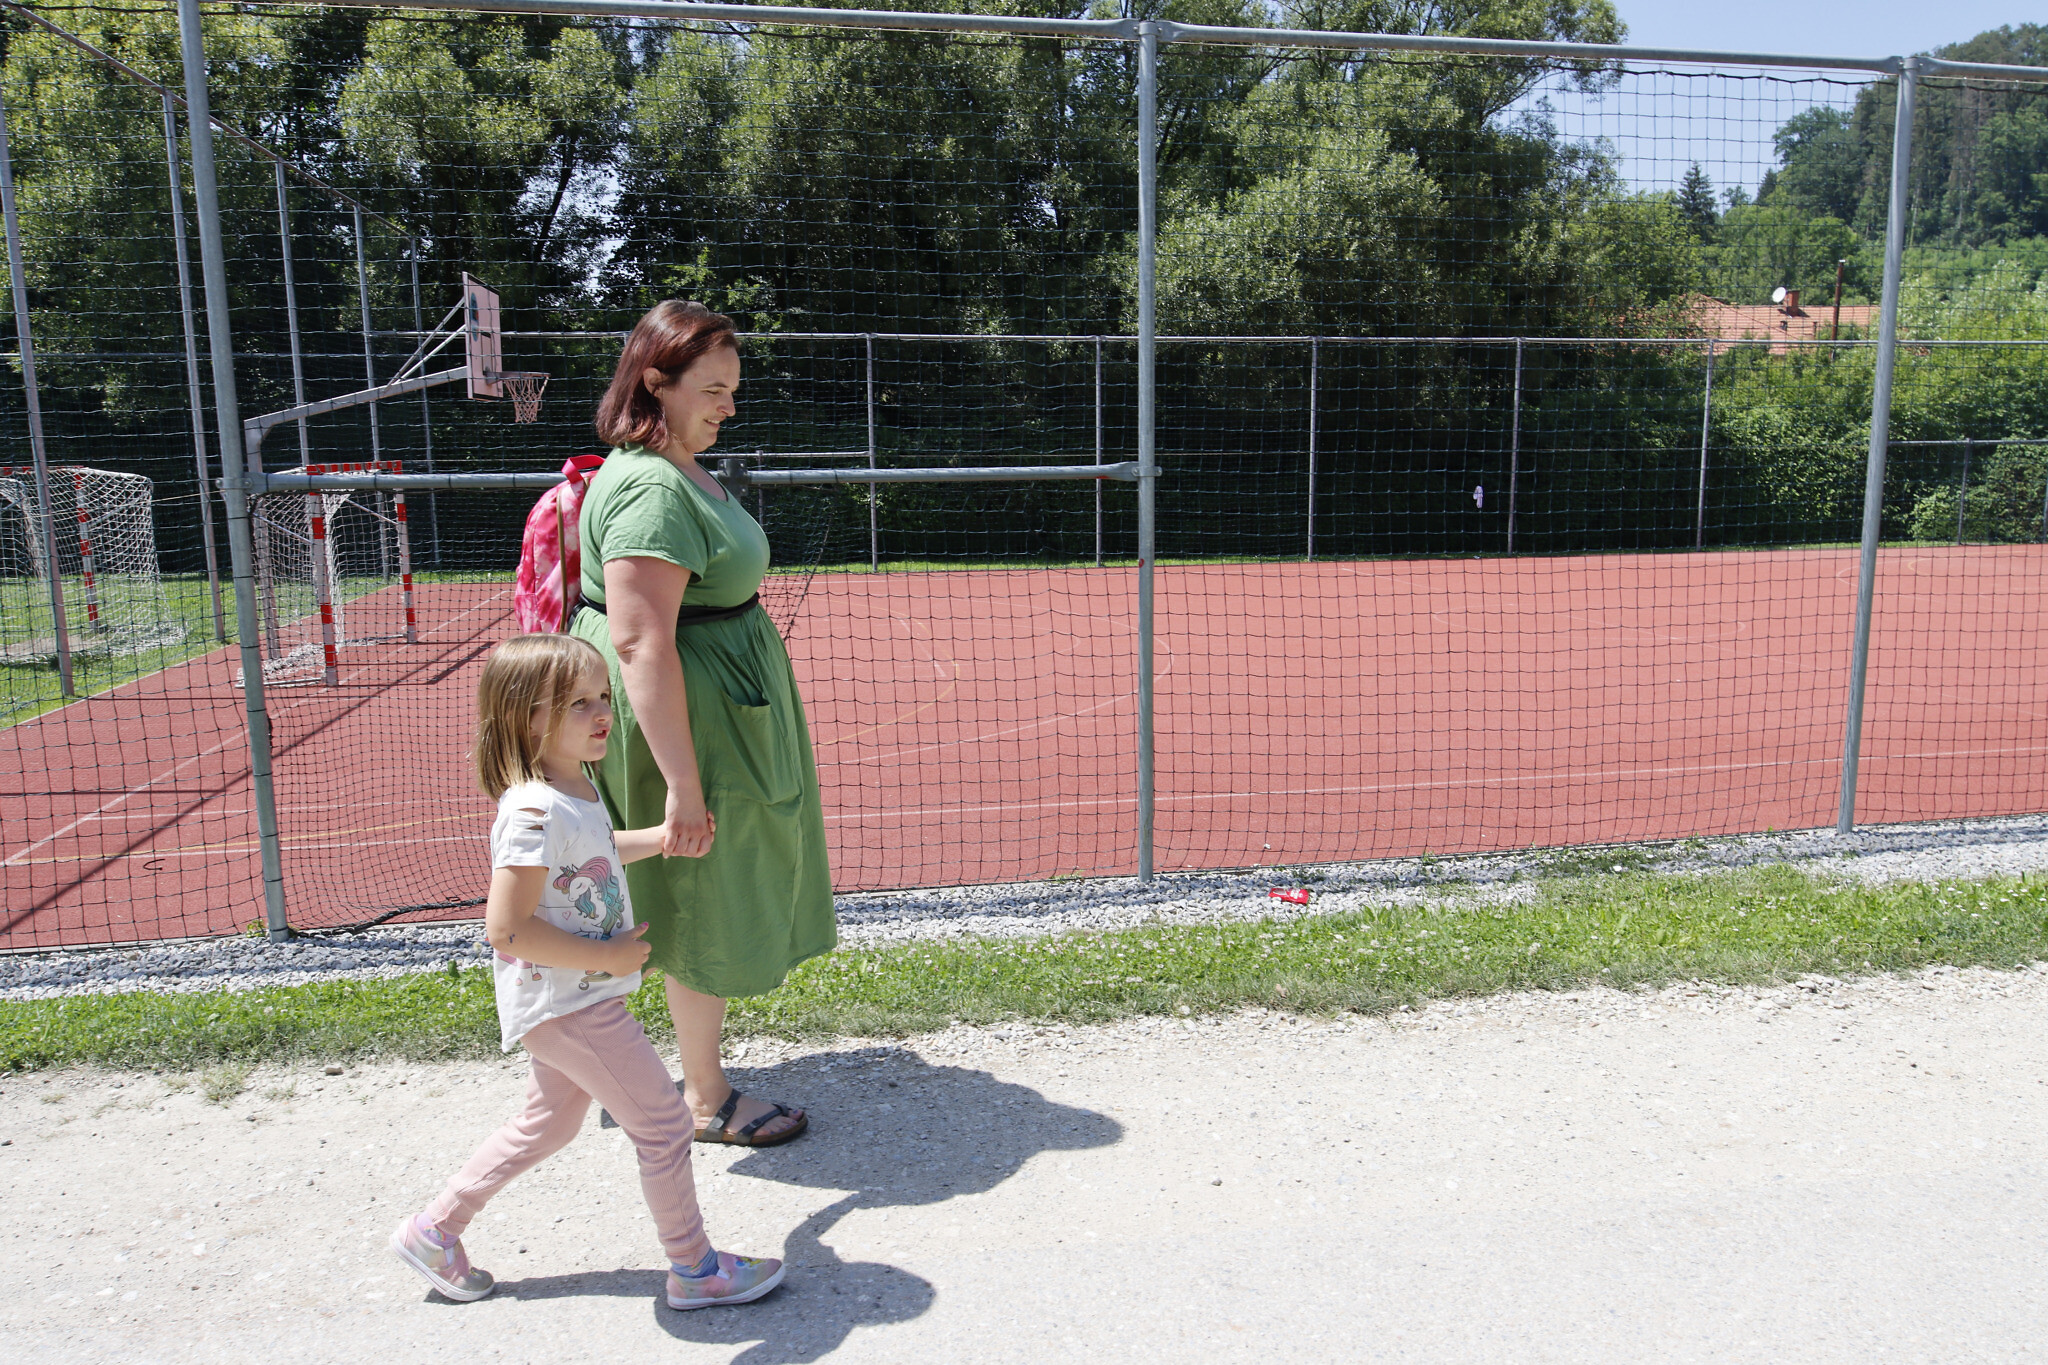 Amy Feineman walks home with her daughter Lily after school in Graz, Austria, on June 27, 2022. (Raquel G. Frohlich)